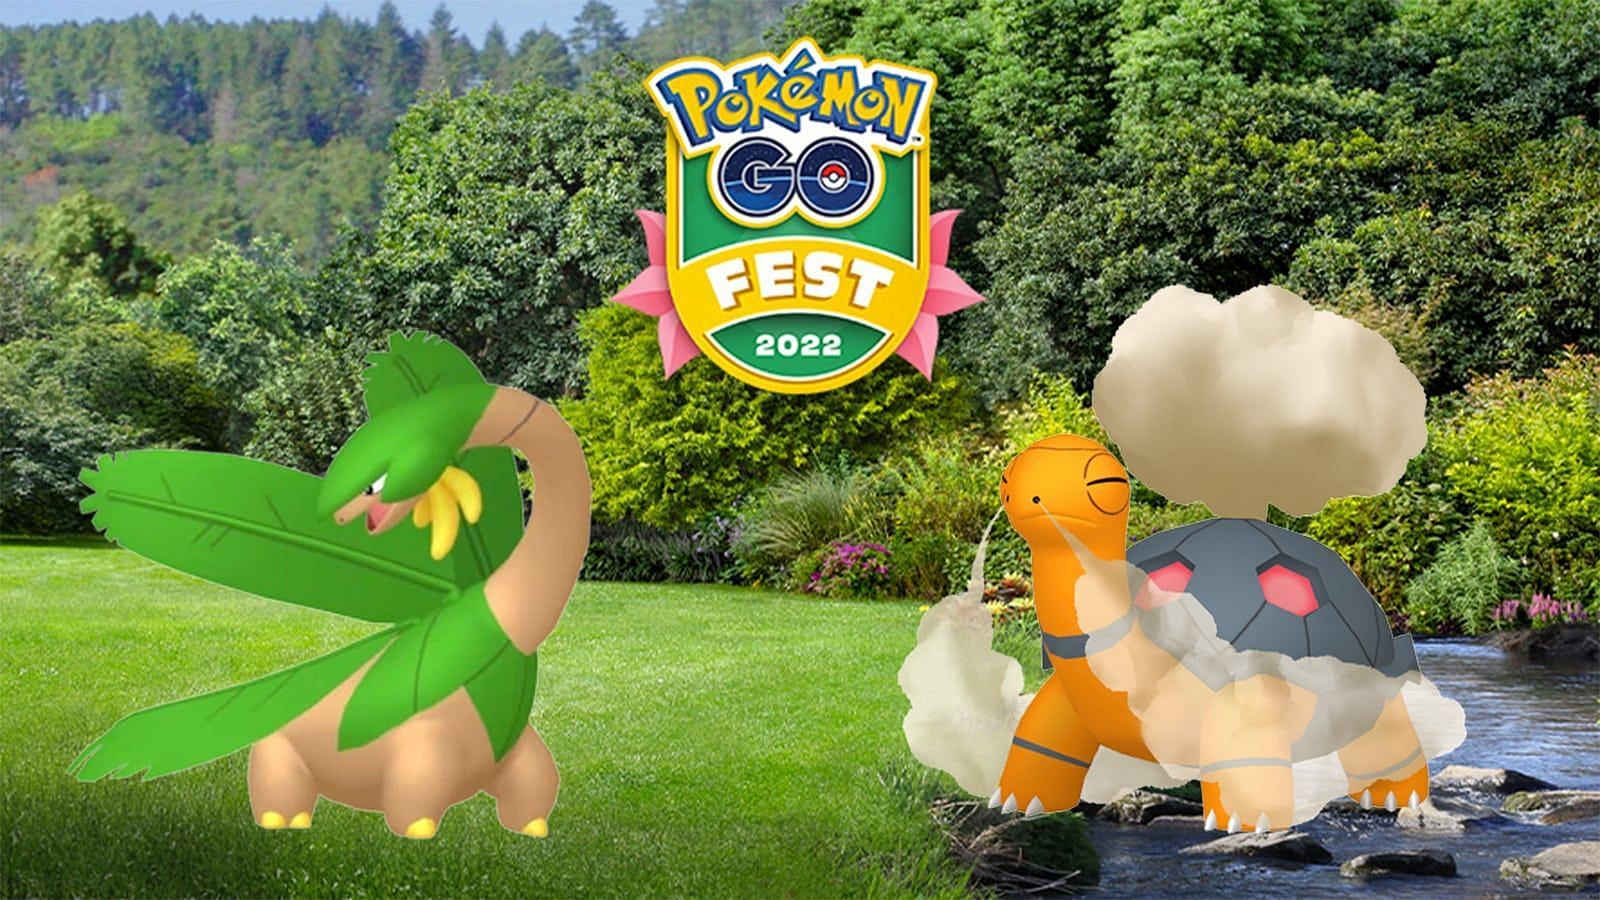 Torkoal and Tropius were available globally during Pokemon GO Fest 2022 (Image via Niantic)